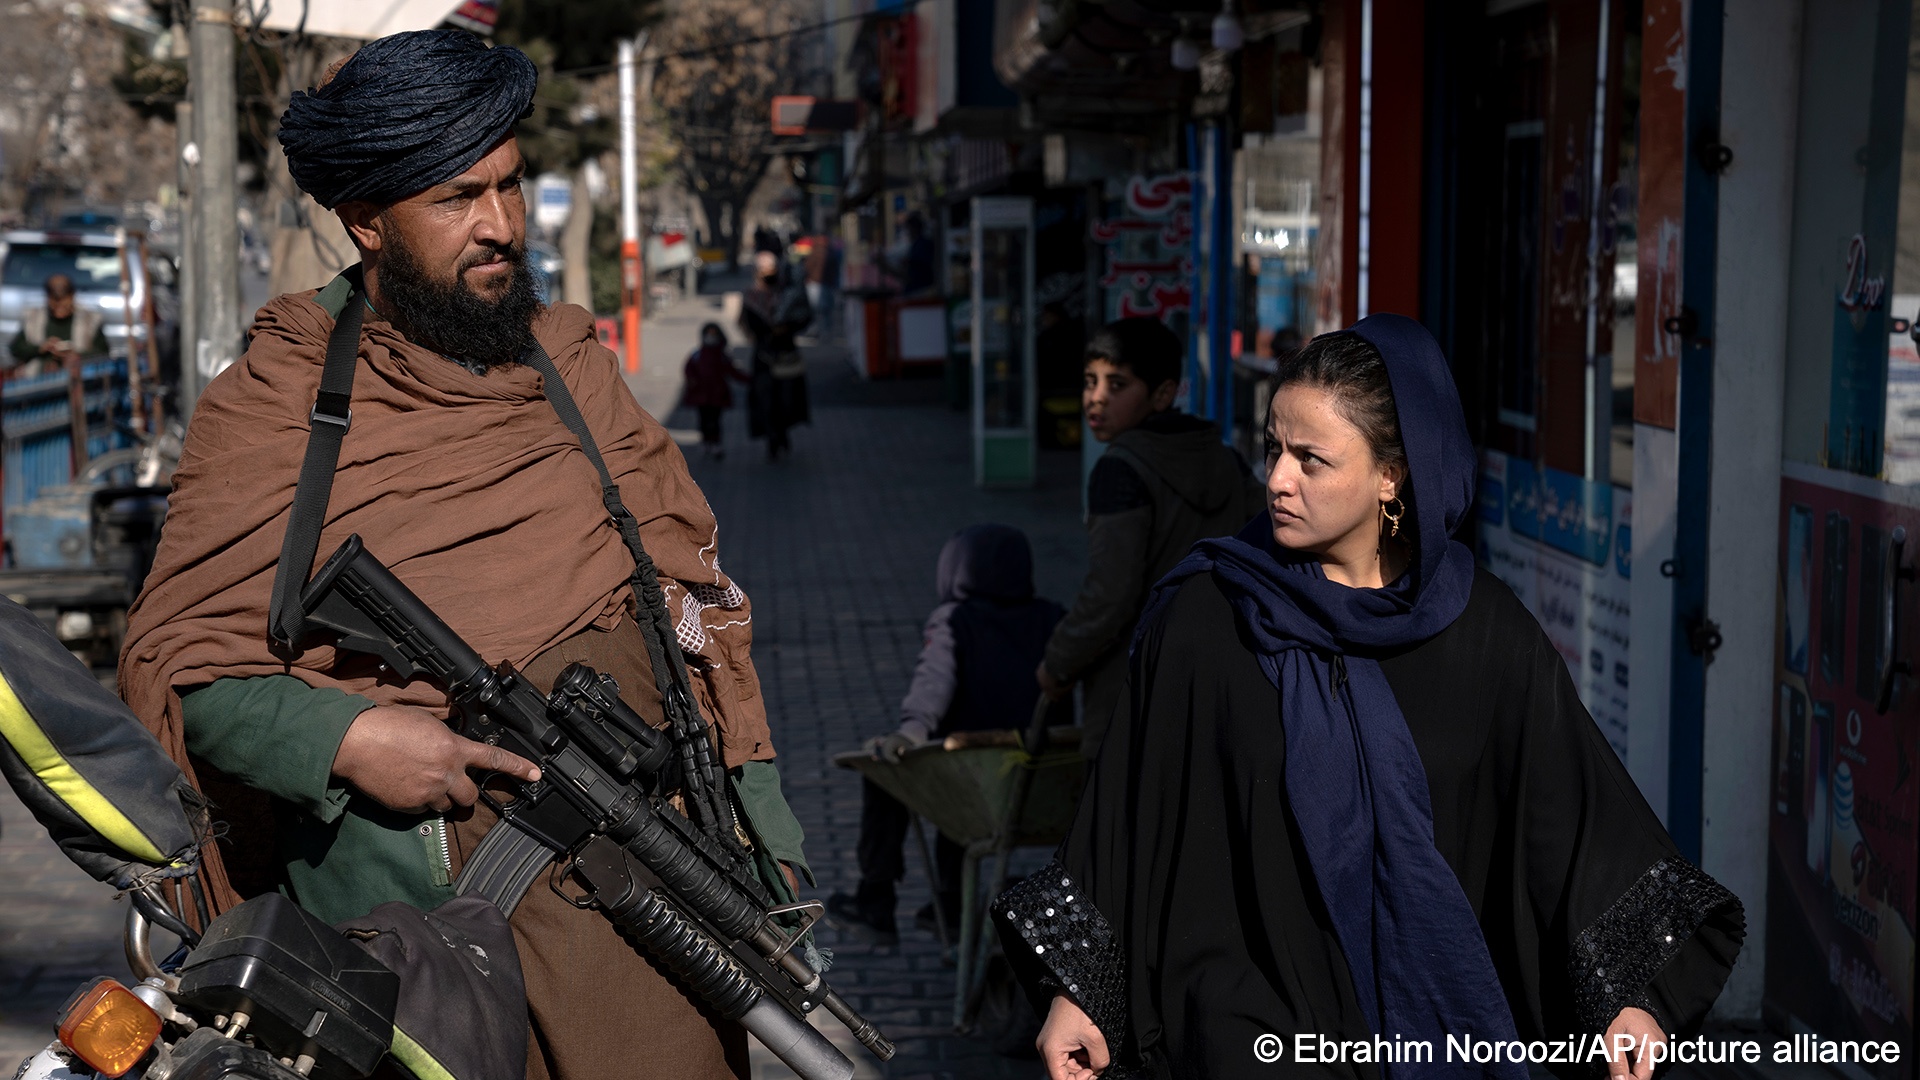 A Taliban fighter stands guard as a woman walks past in Kabul, Afghanistan, 26 December 2022 (Ebrahim Noroozi/AP/picture alliance)